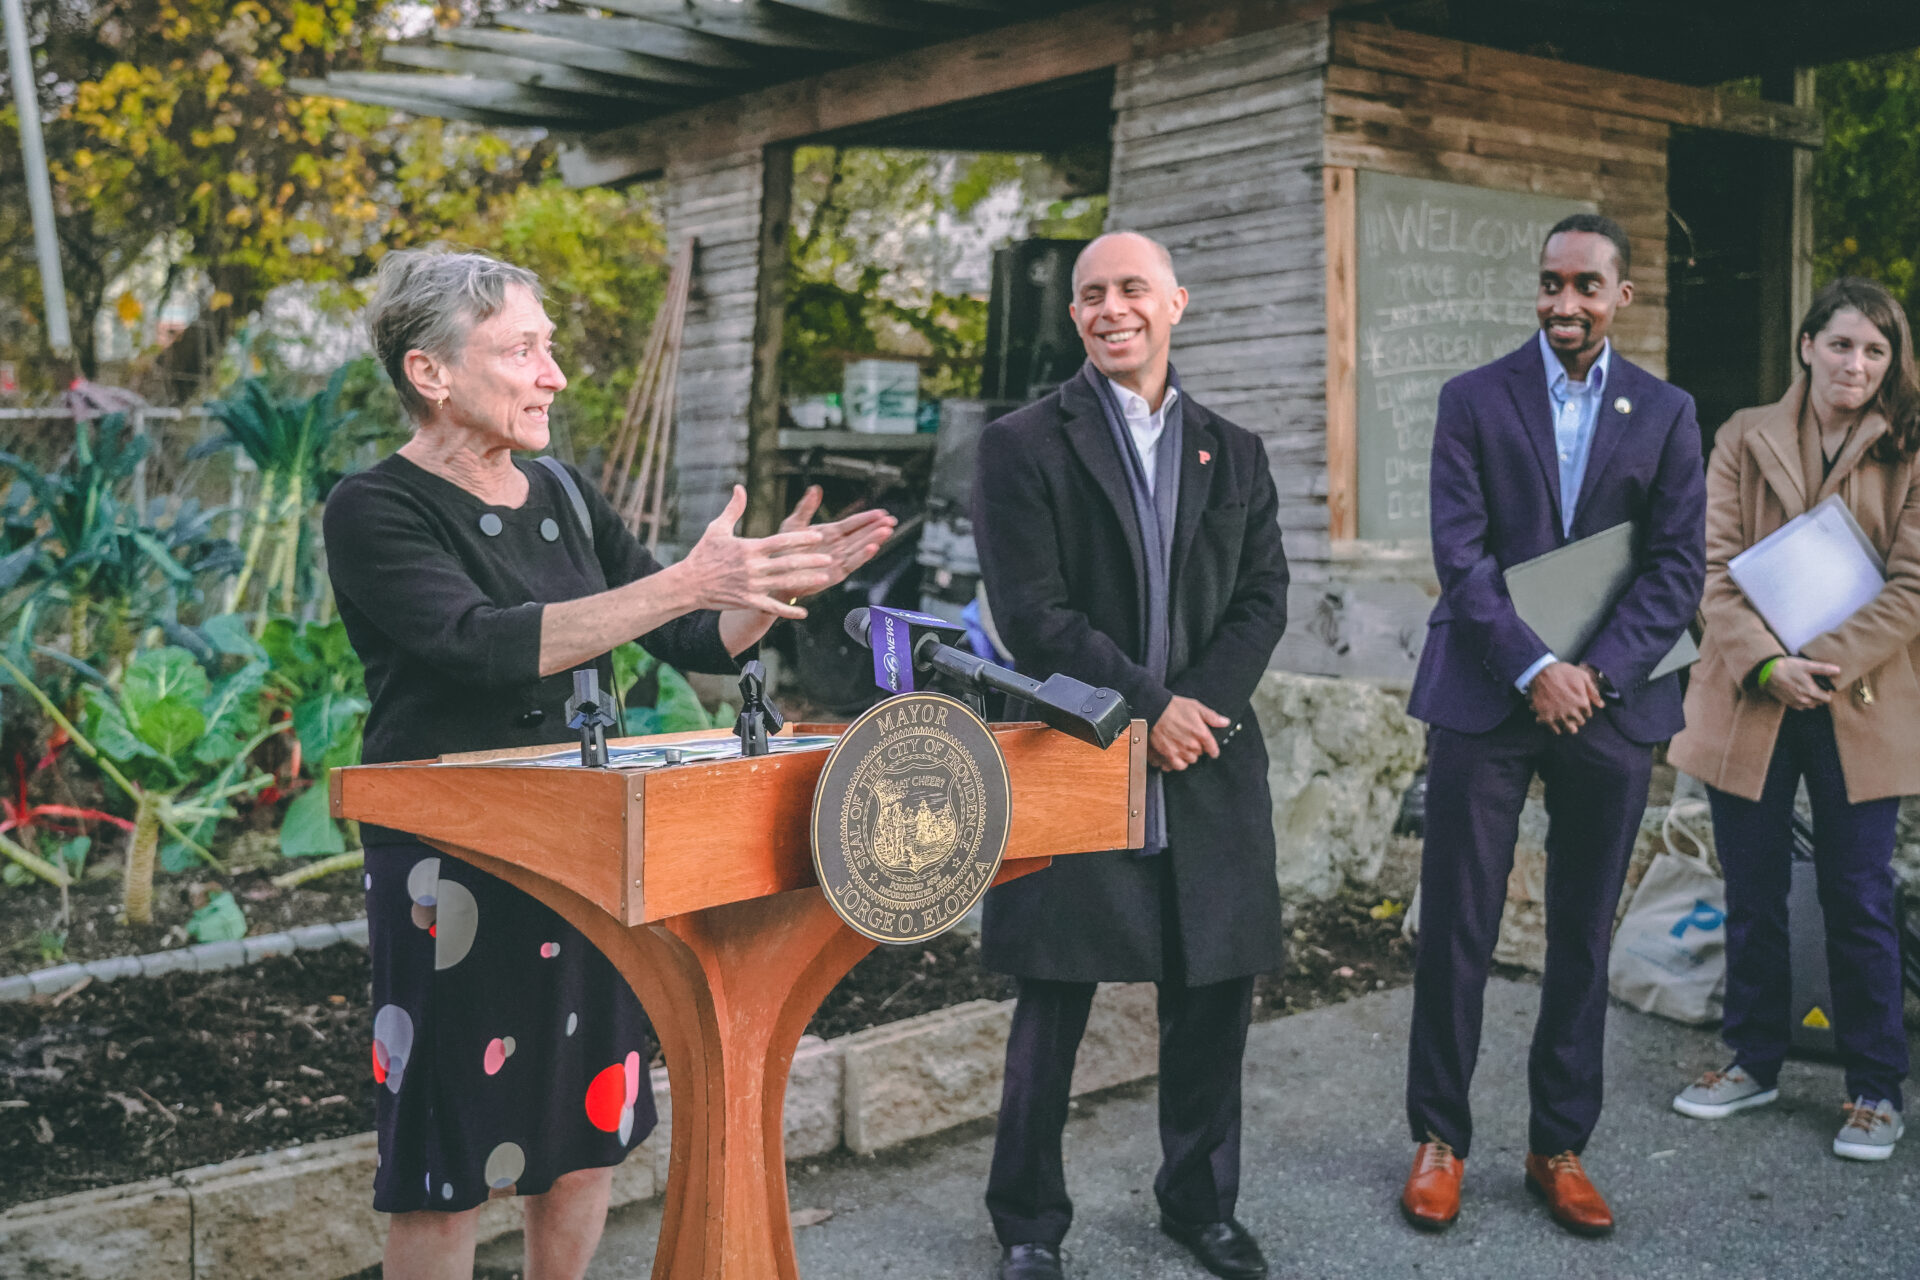 Mayor Elorza Joins Environmental Partners to Release Municipal Composting Report